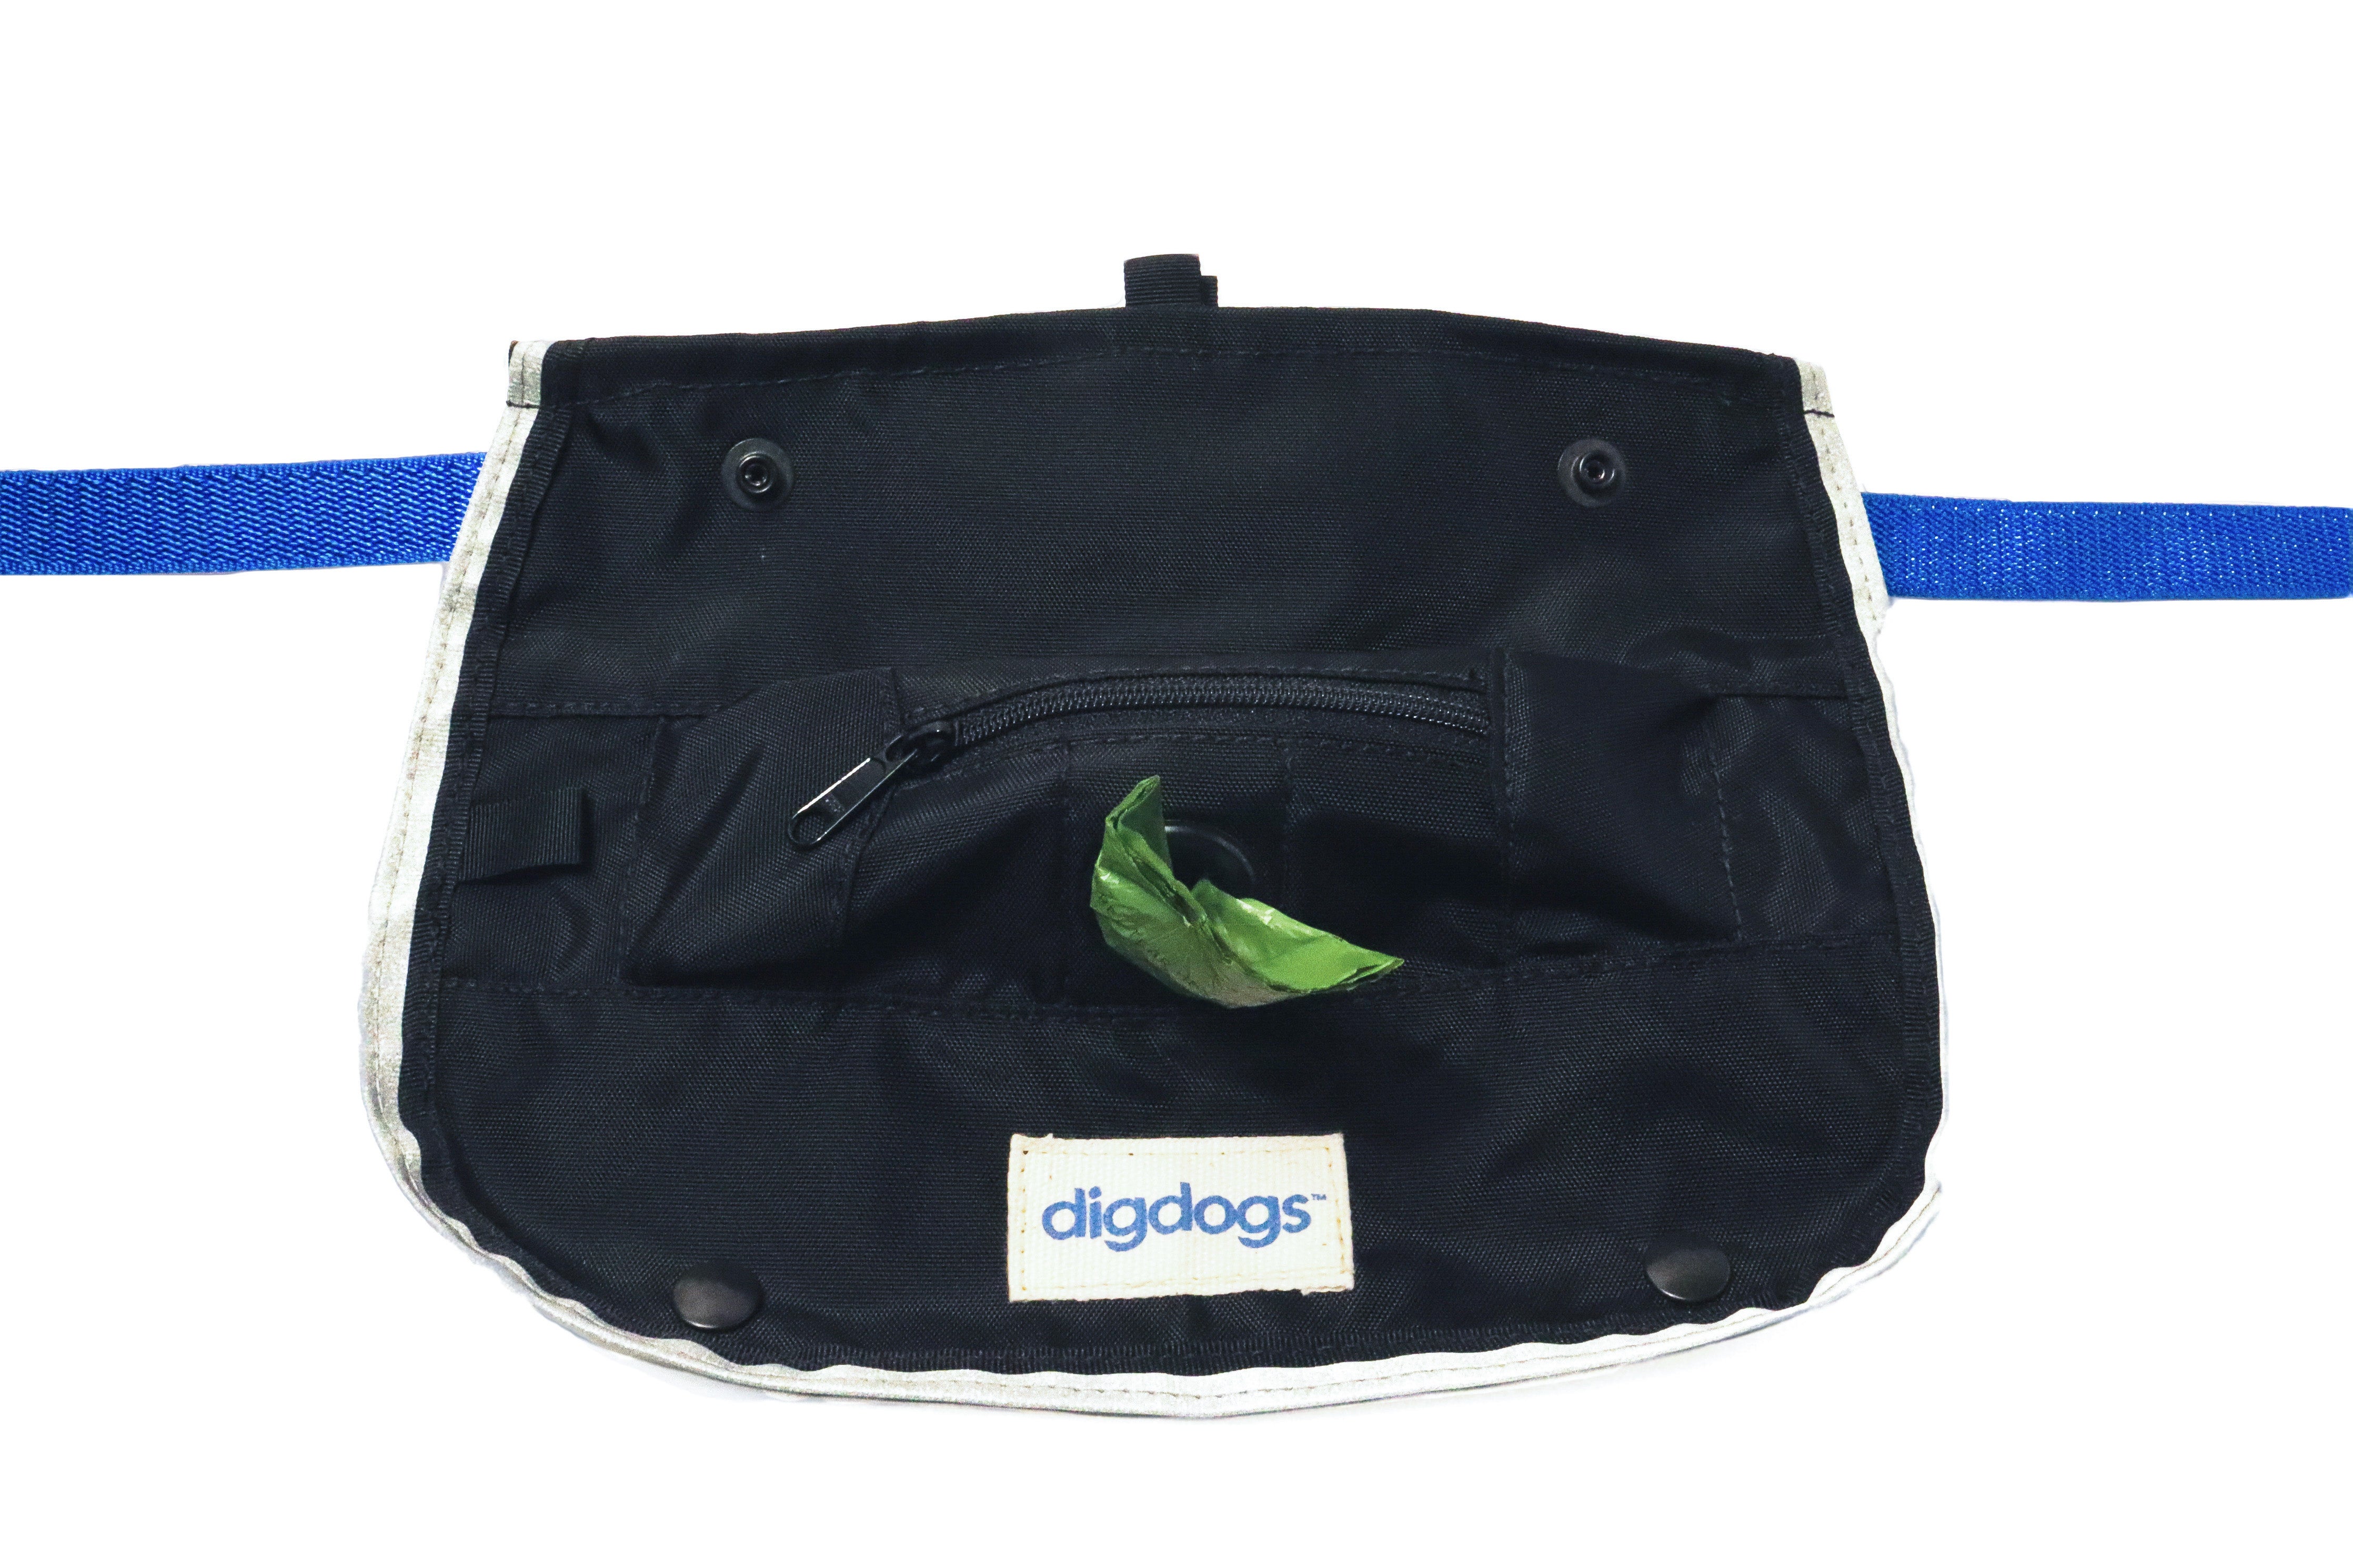 digdogs poop pouch®